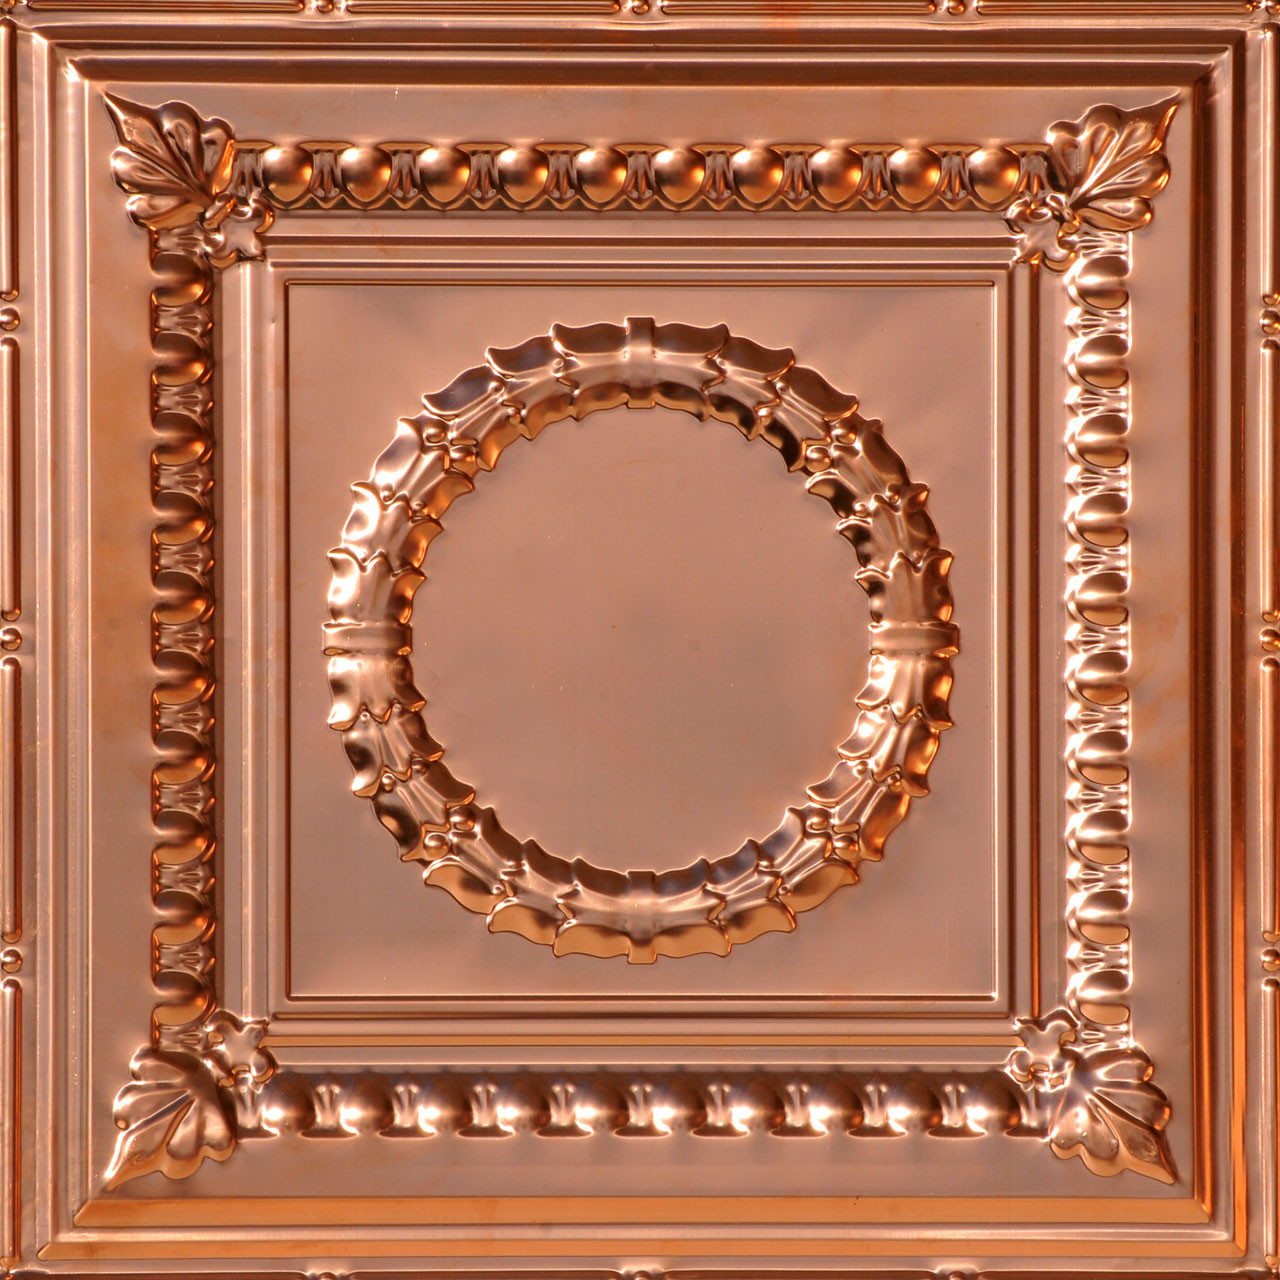 Victory - Shanko Copper Ceiling Tile - #503